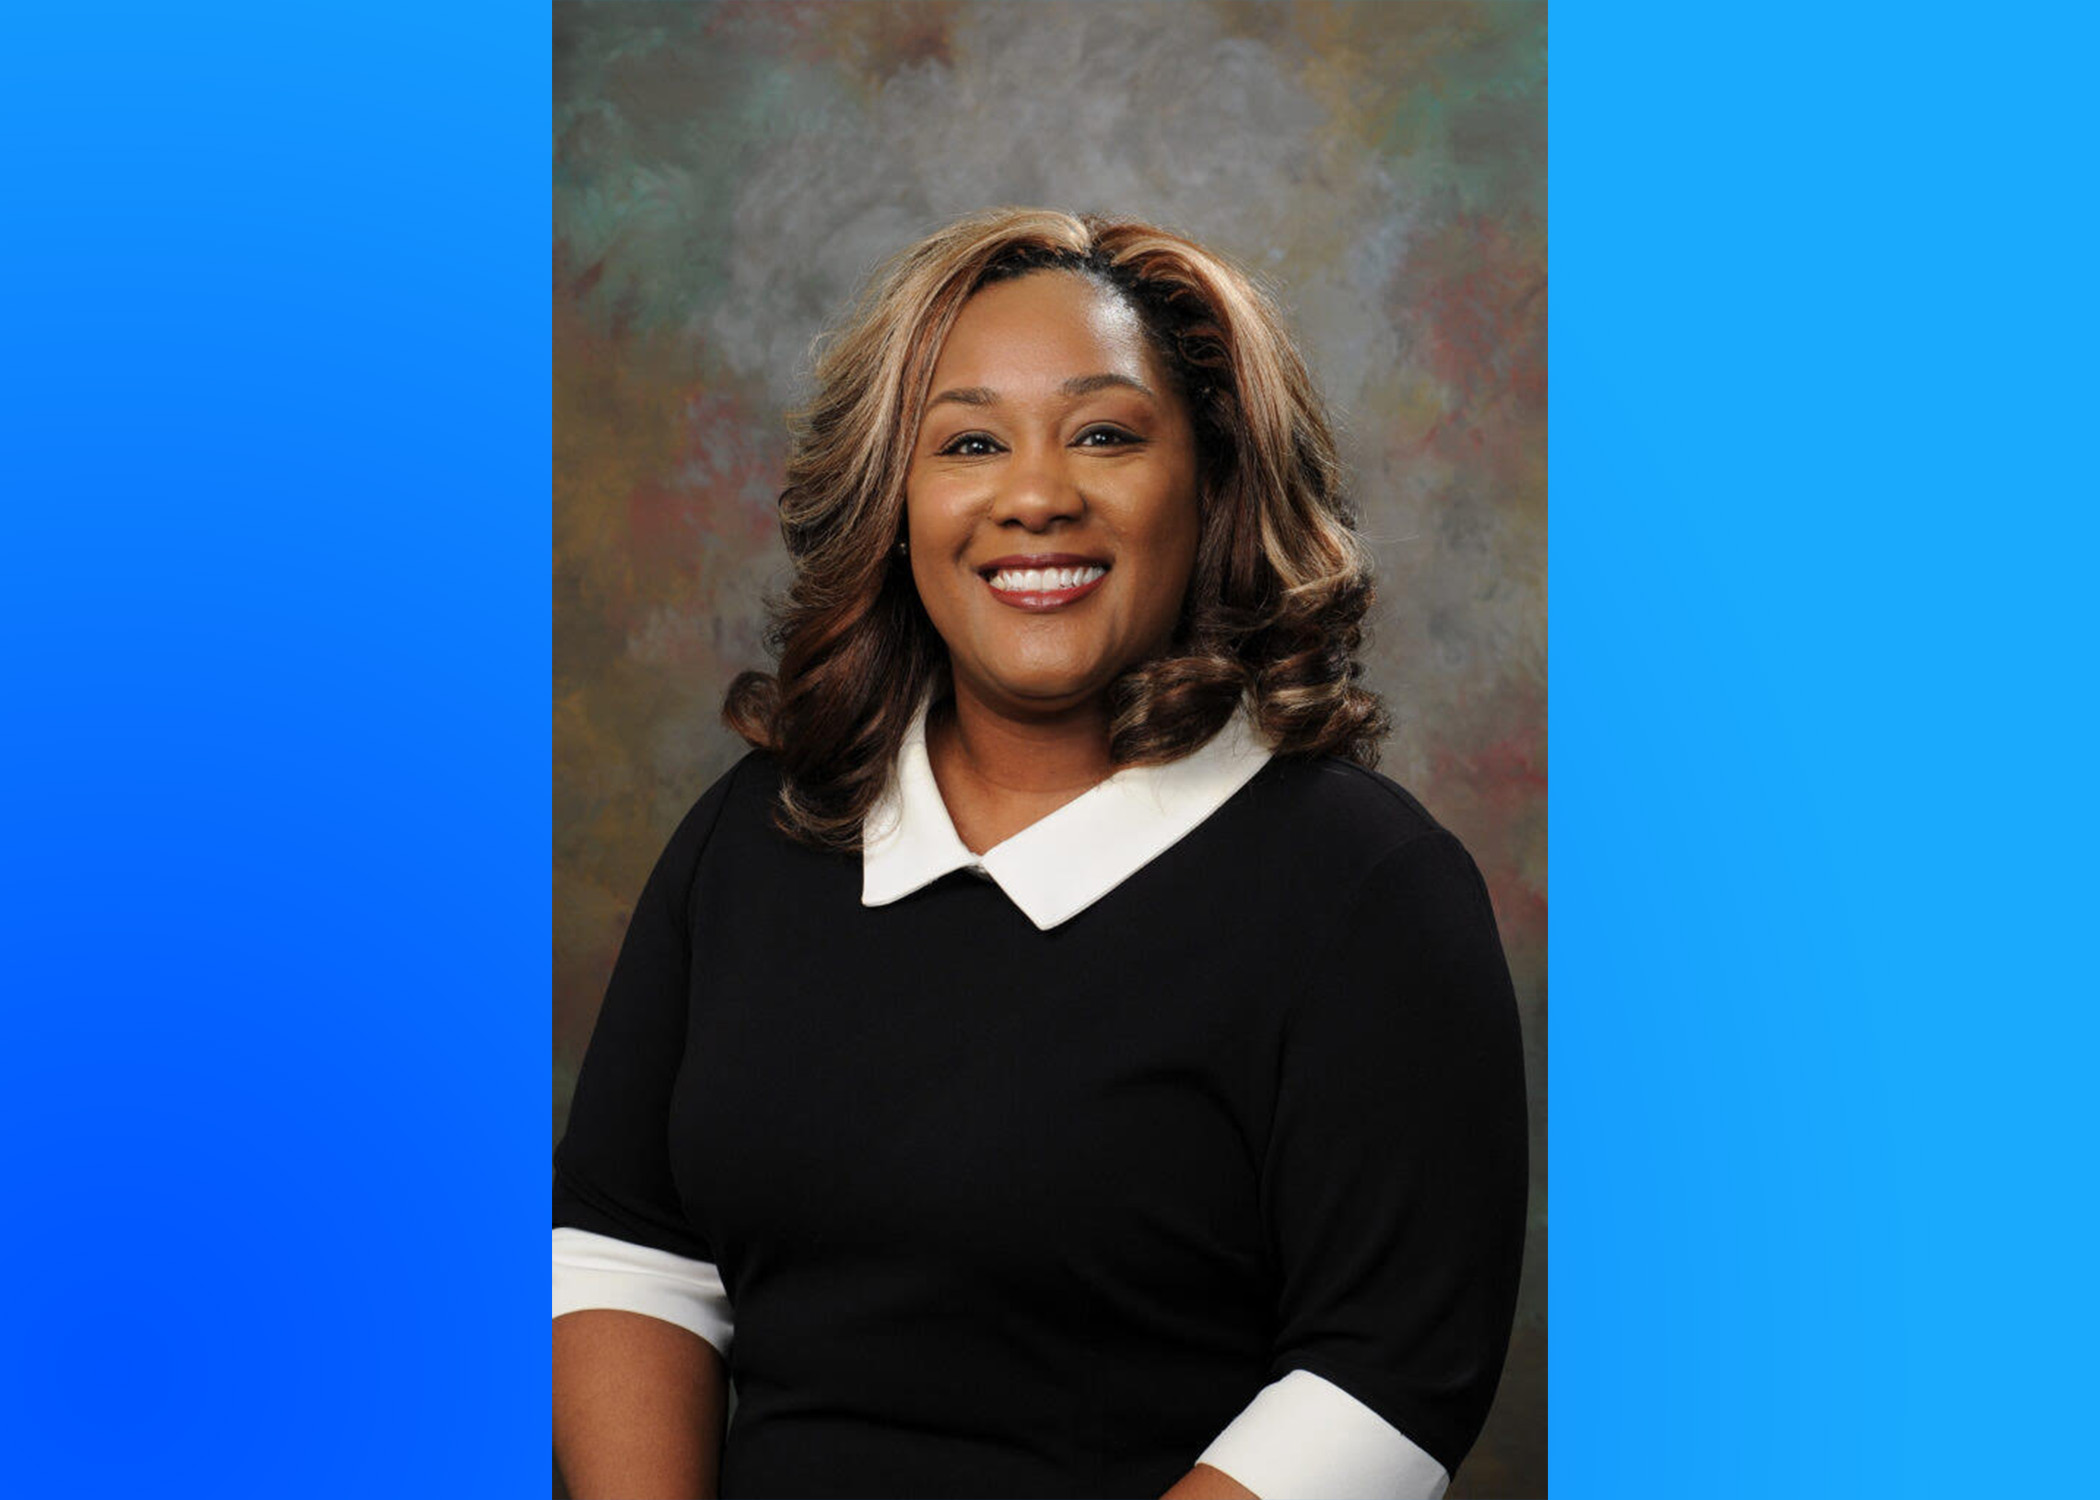 JefCoEd president re-elected, 'This is what I was called to do'